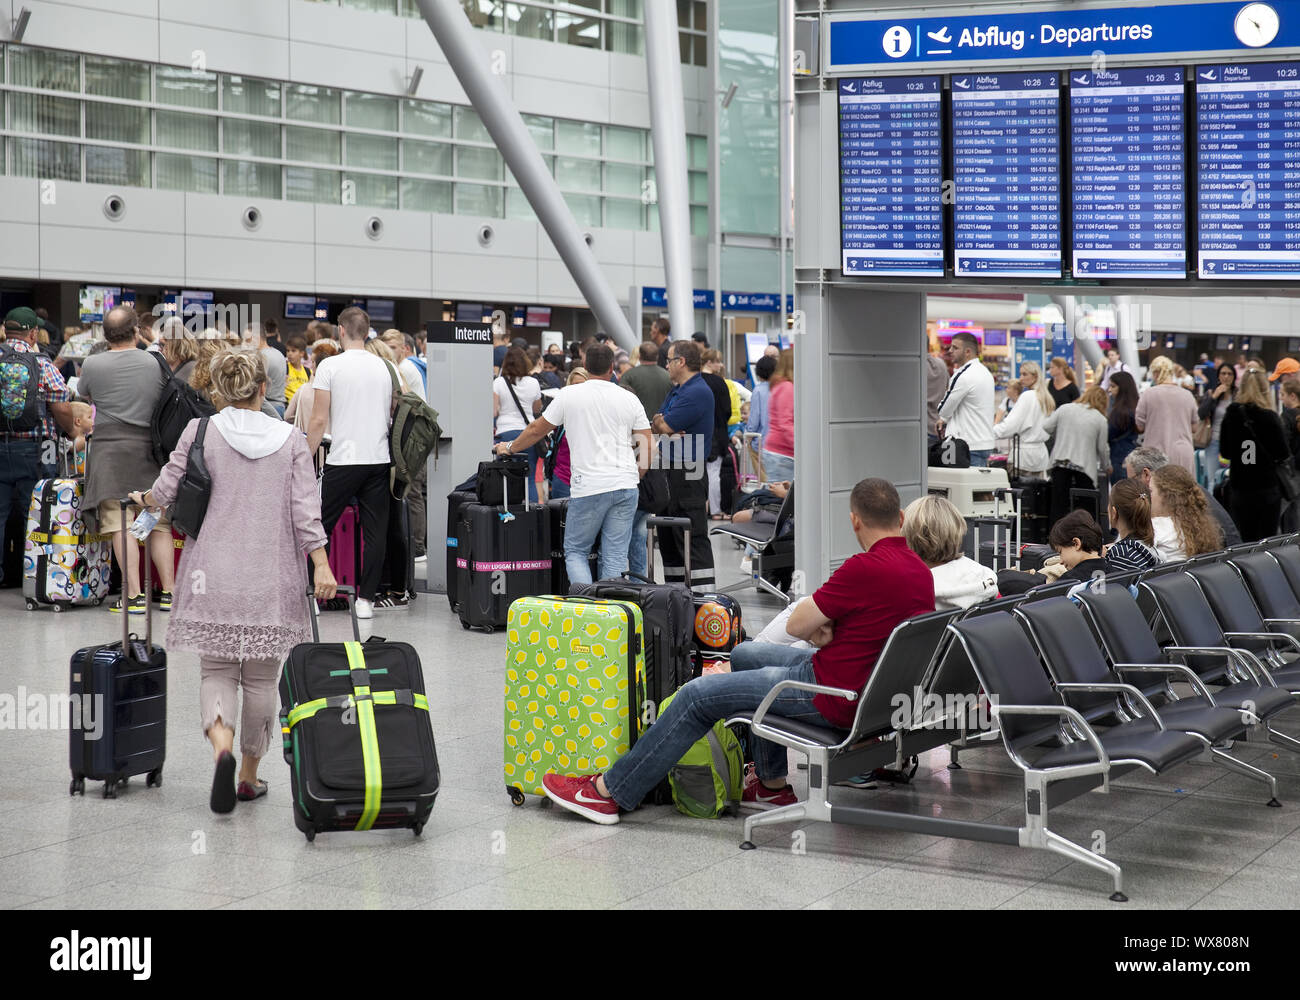 airport terminal with many people during the holliday season, Duesseldorf, Germany, Europe Stock Photo